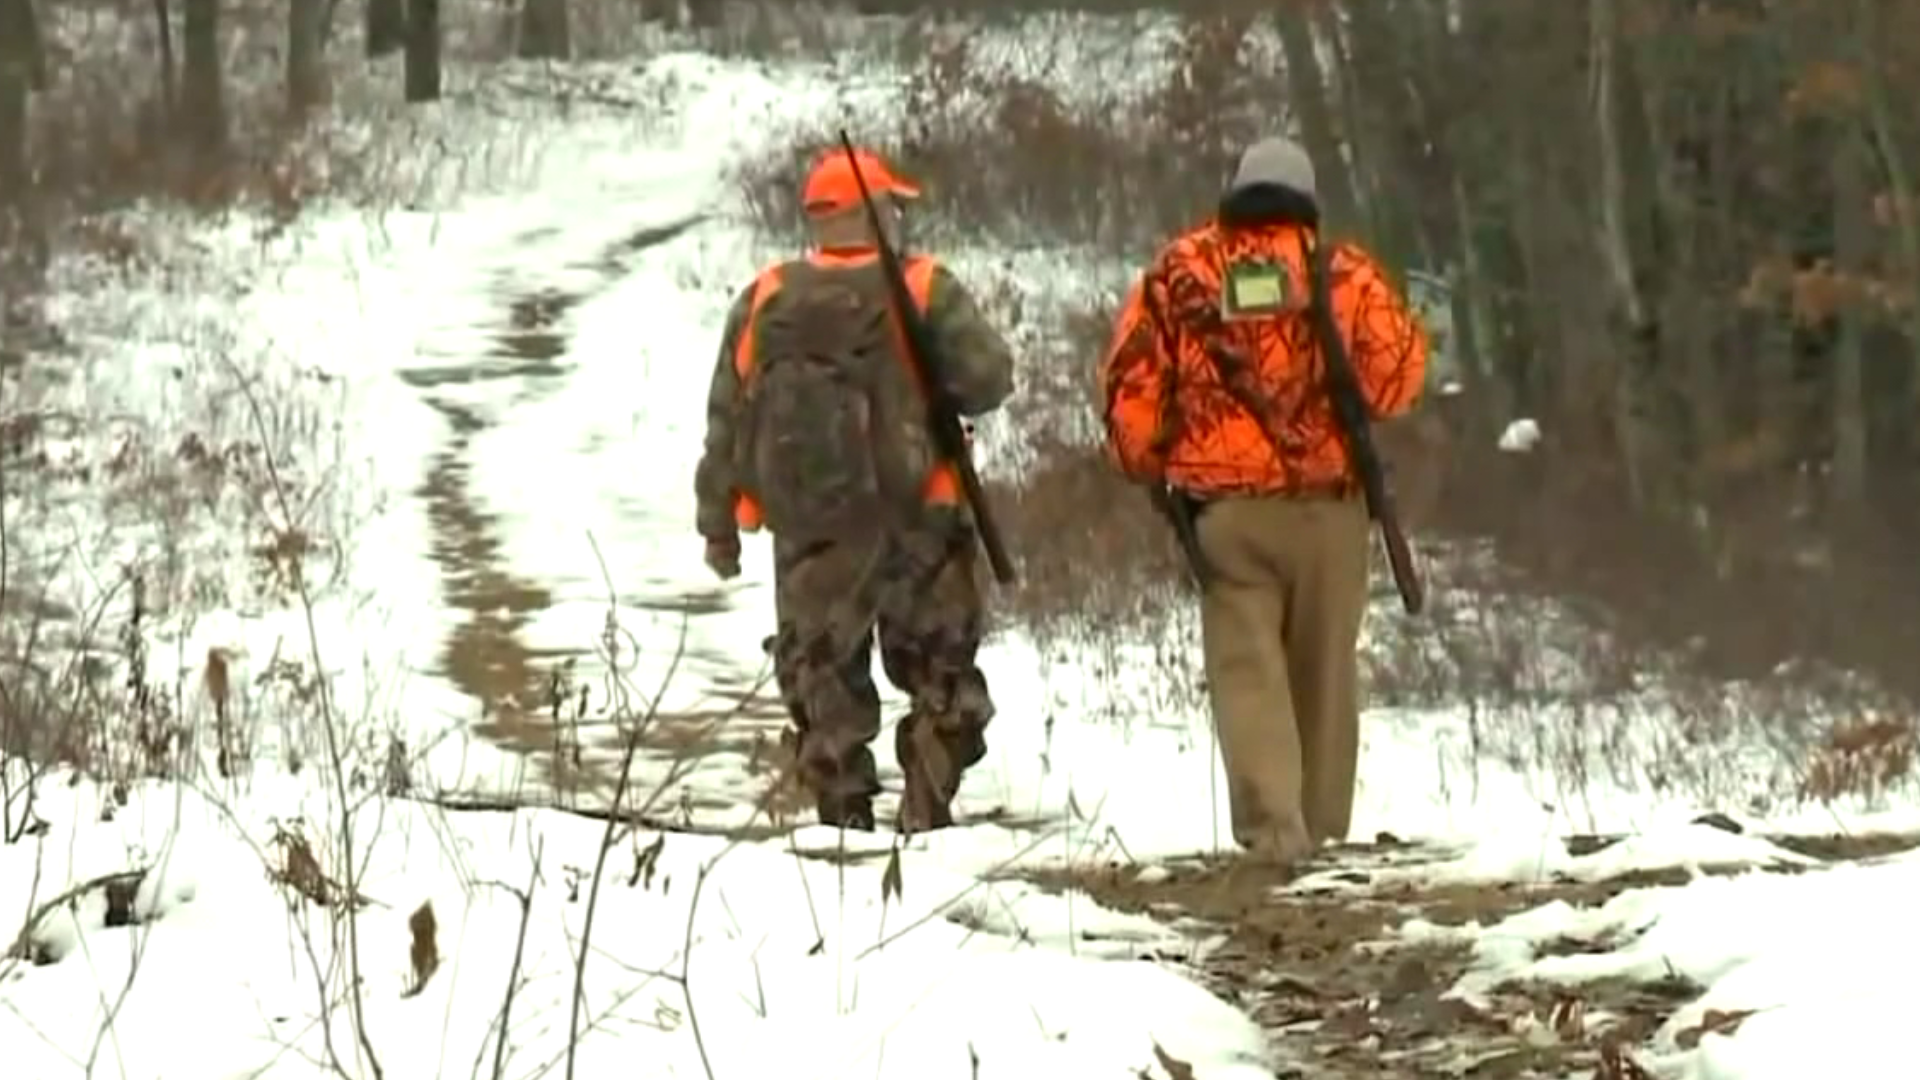 Doctors in Williamsport are urging hunters to follow COVID-19 guidelines over the next few weeks.